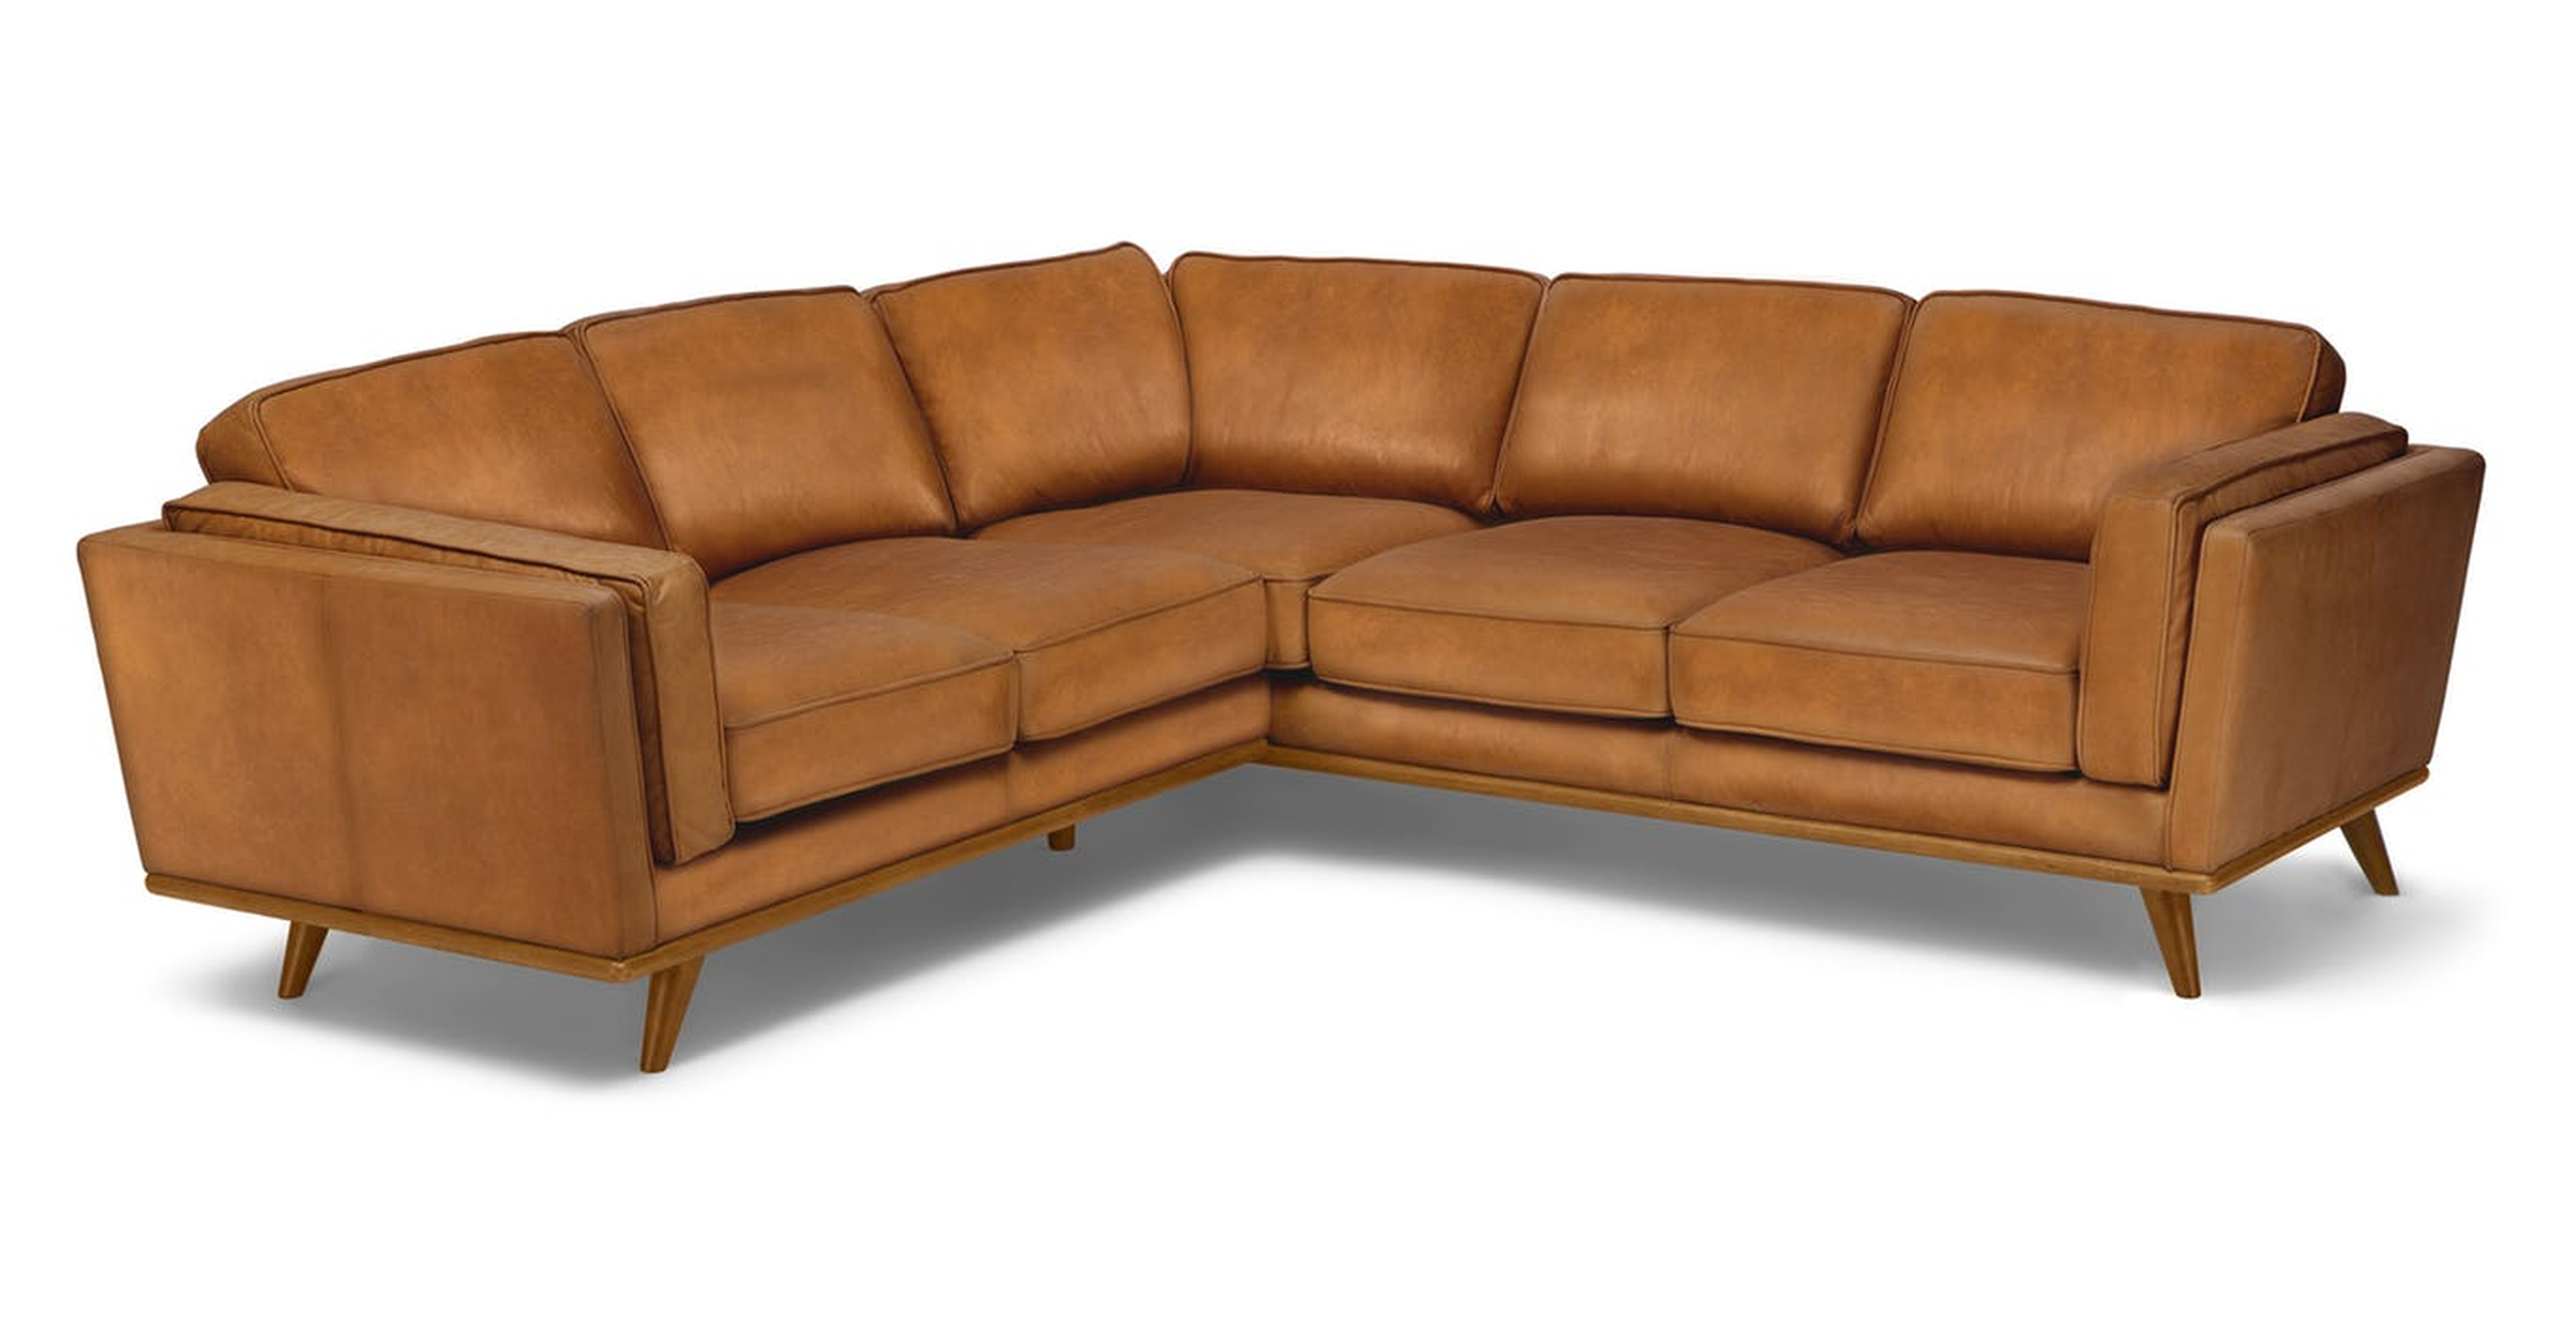 Timber Charme Tan Corner Sectional - Article